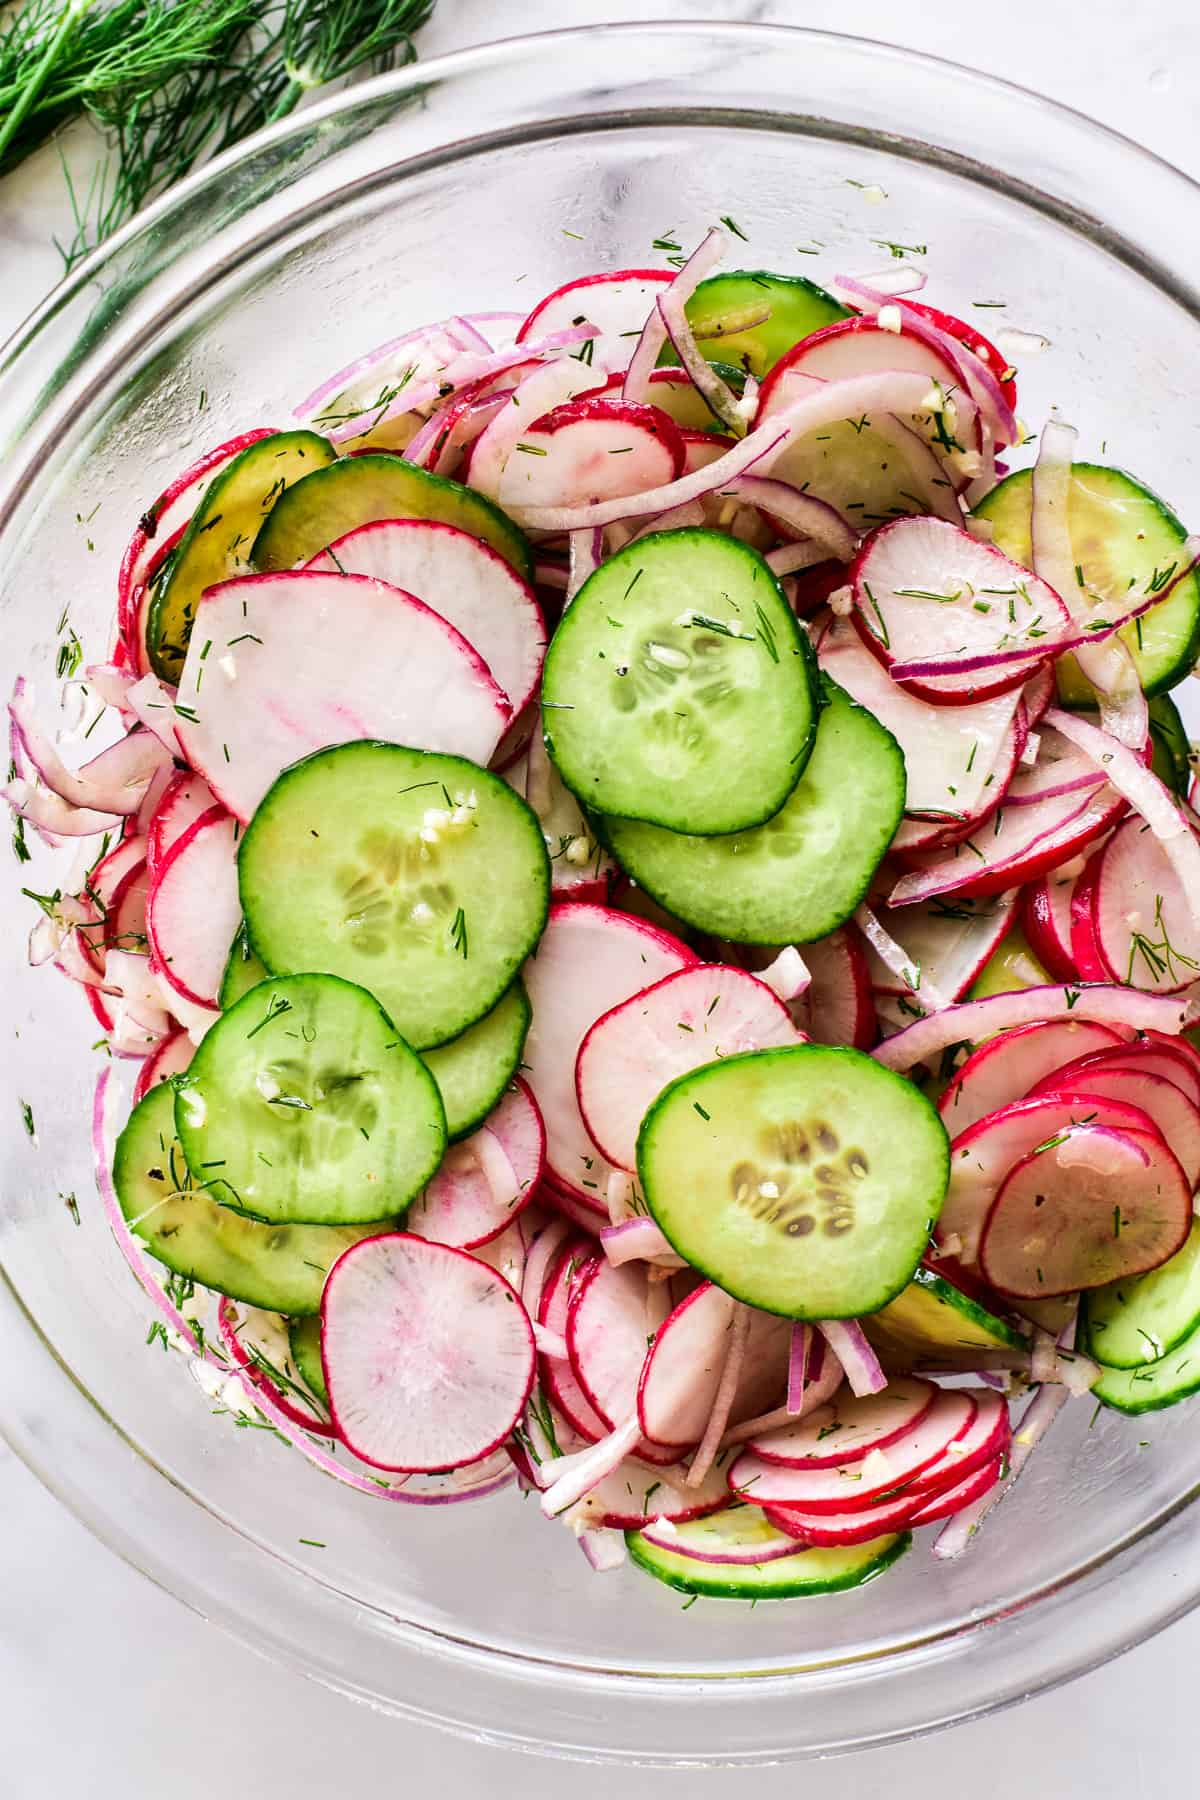 Radish Salad combined in a mixing bowl